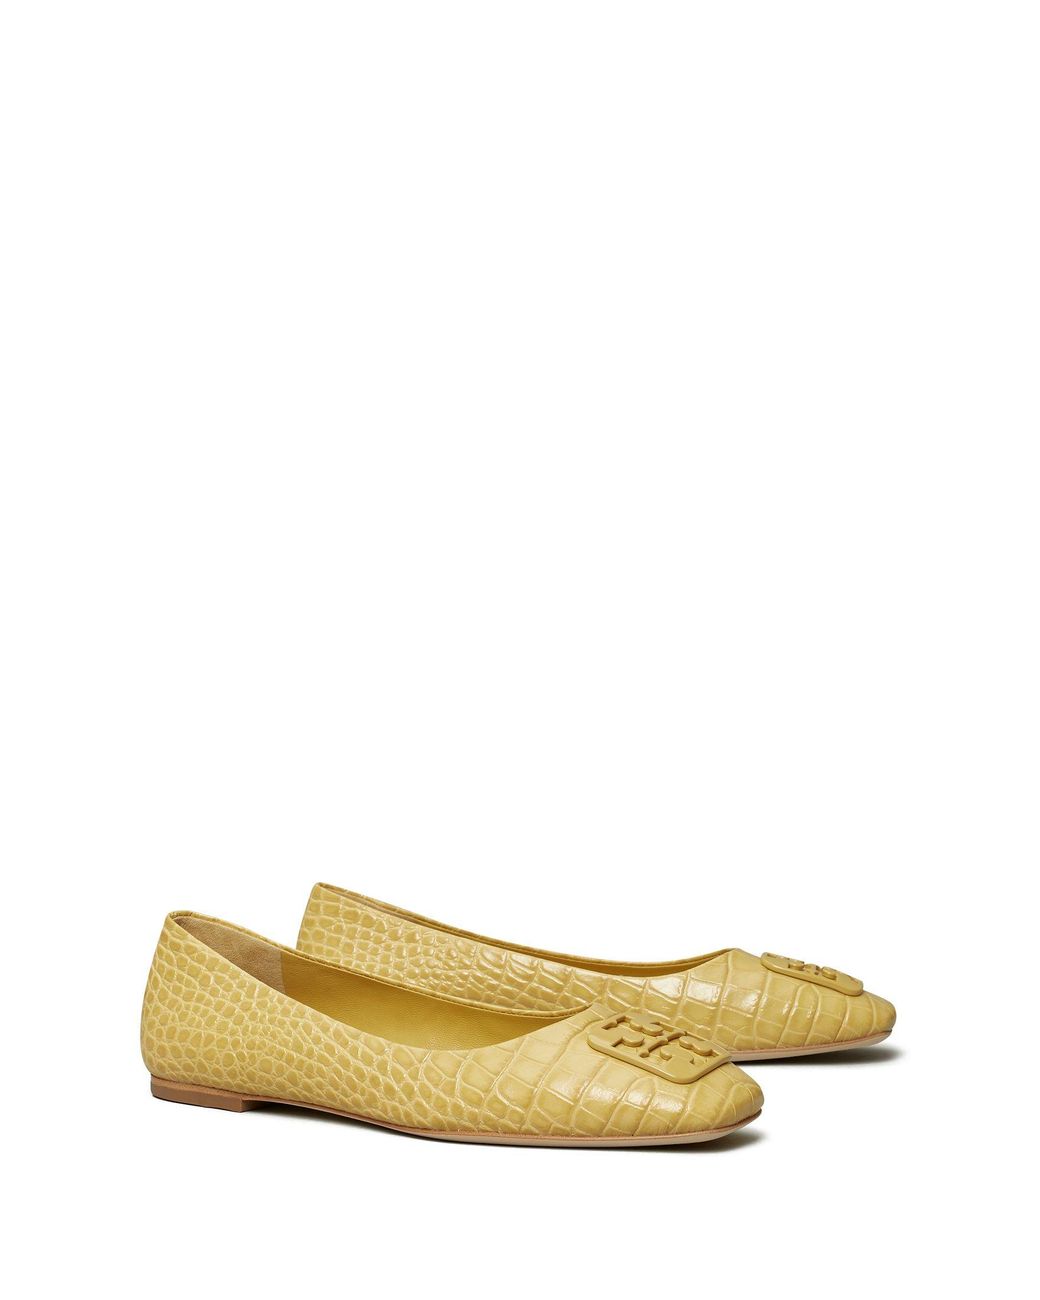 Tory Burch Leather Georgia Ballet Flat in Light Yellow (Yellow) | Lyst